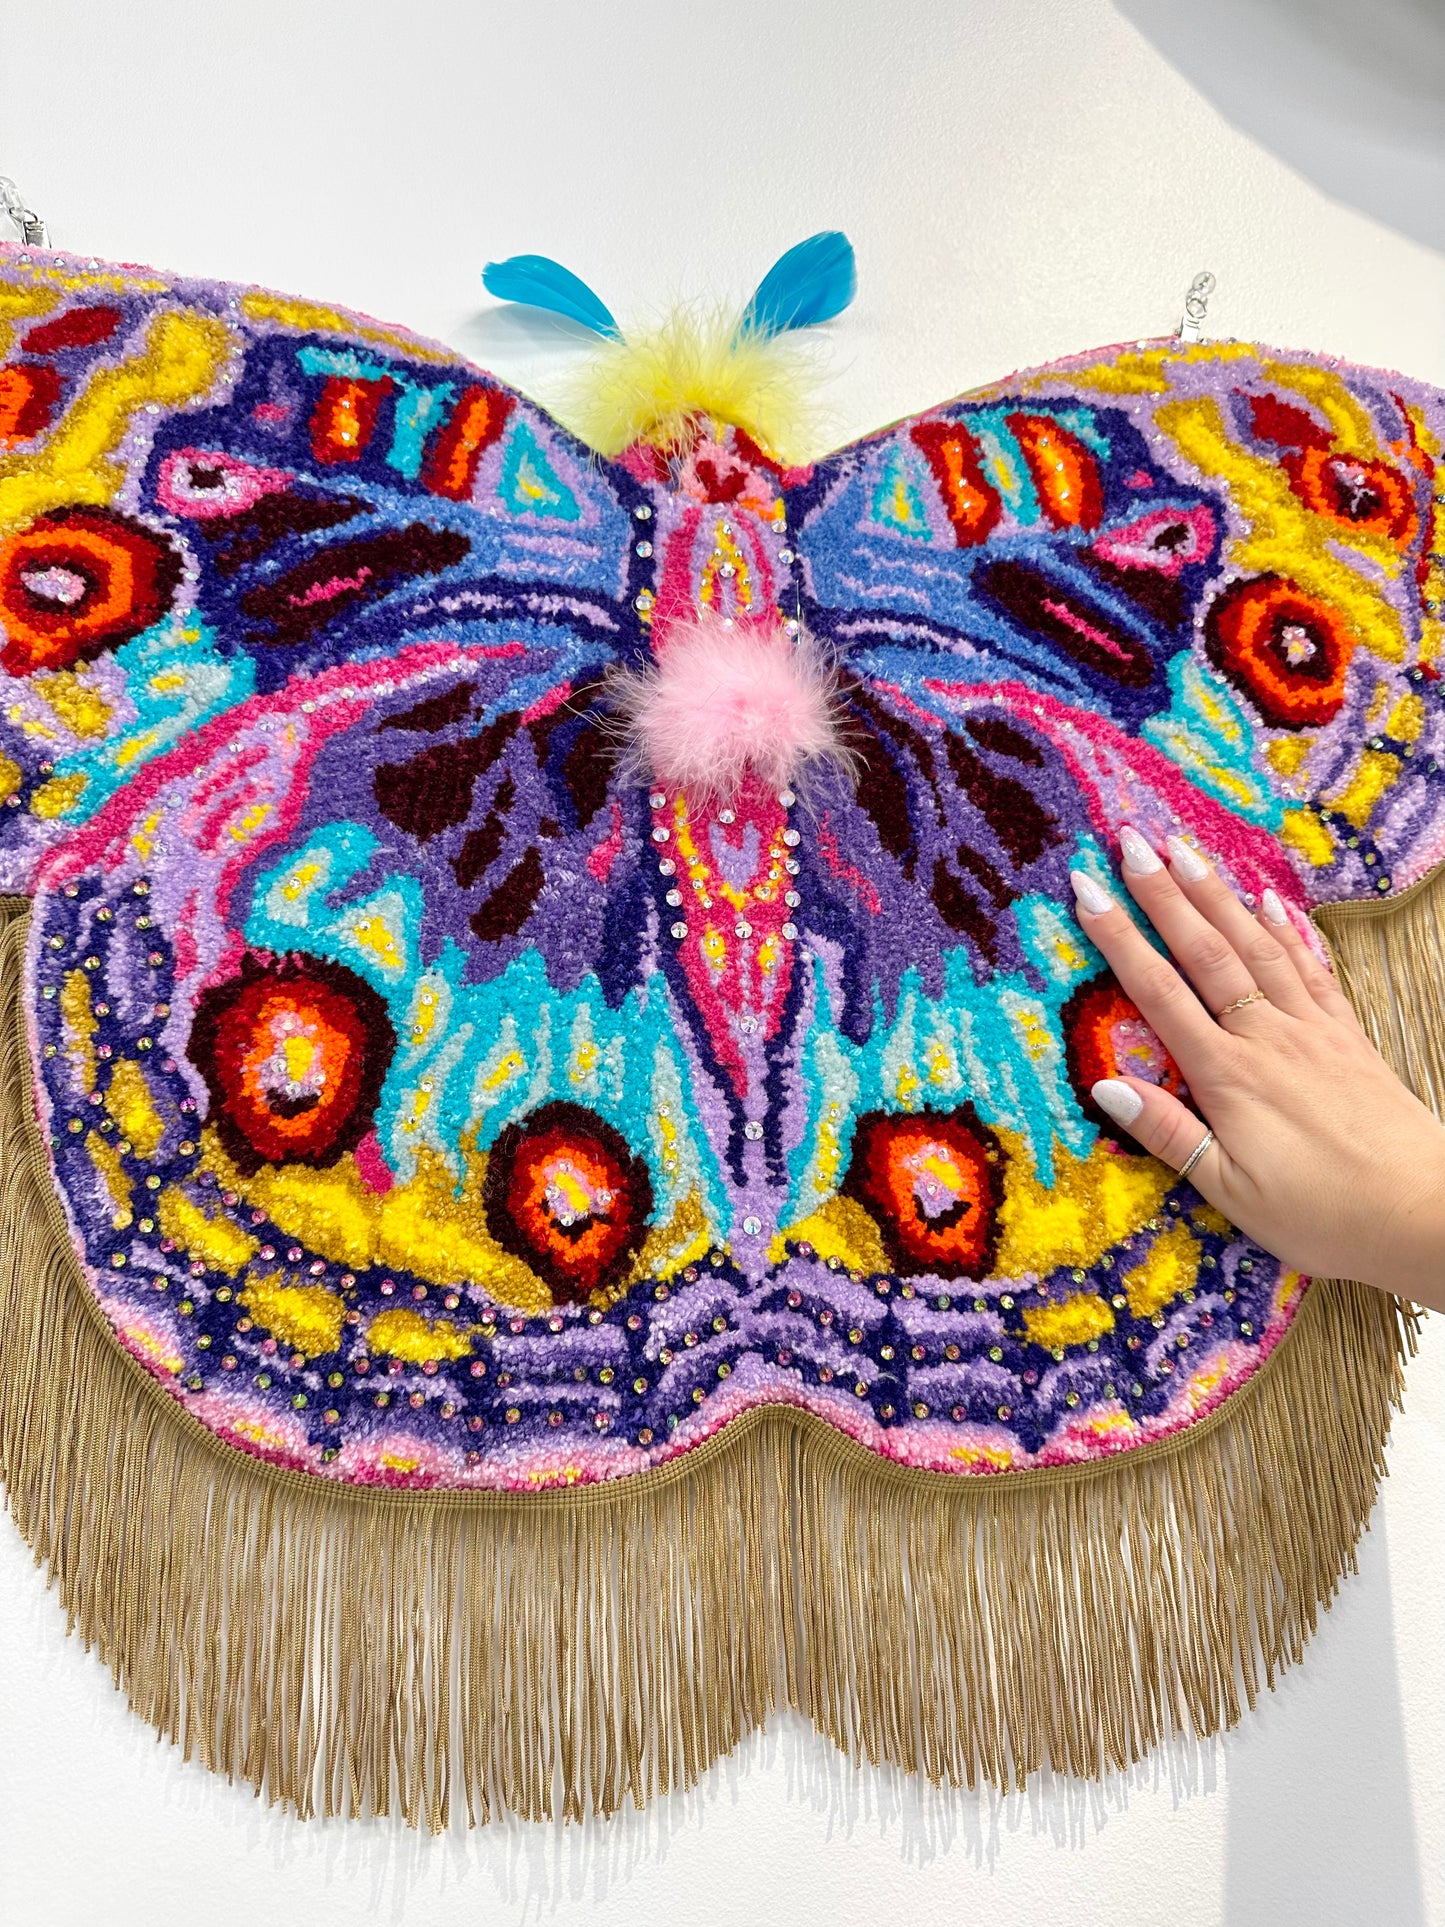 HandMade By The Artist: Beatrice The Bedazzled Buckeye Butterfly with Fringe and Feathers , by Chrissy Crater